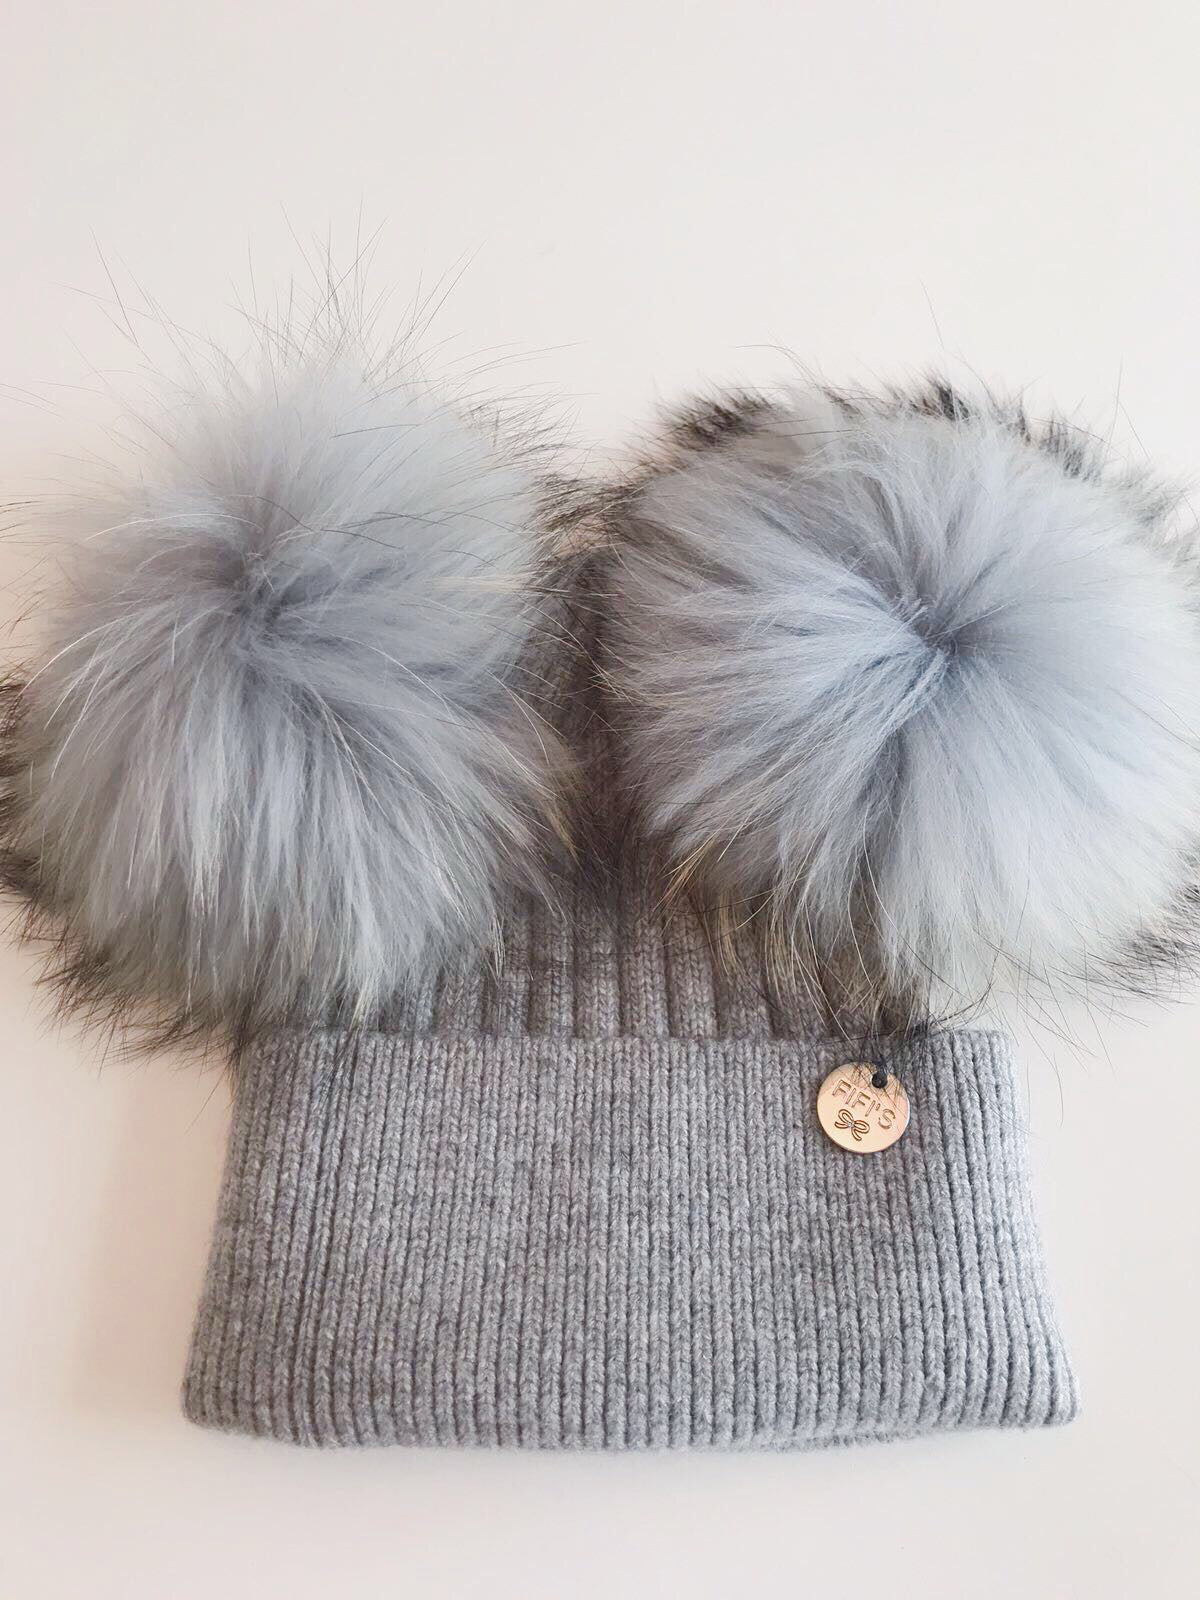 Cashmere double - Light grey with matching pom